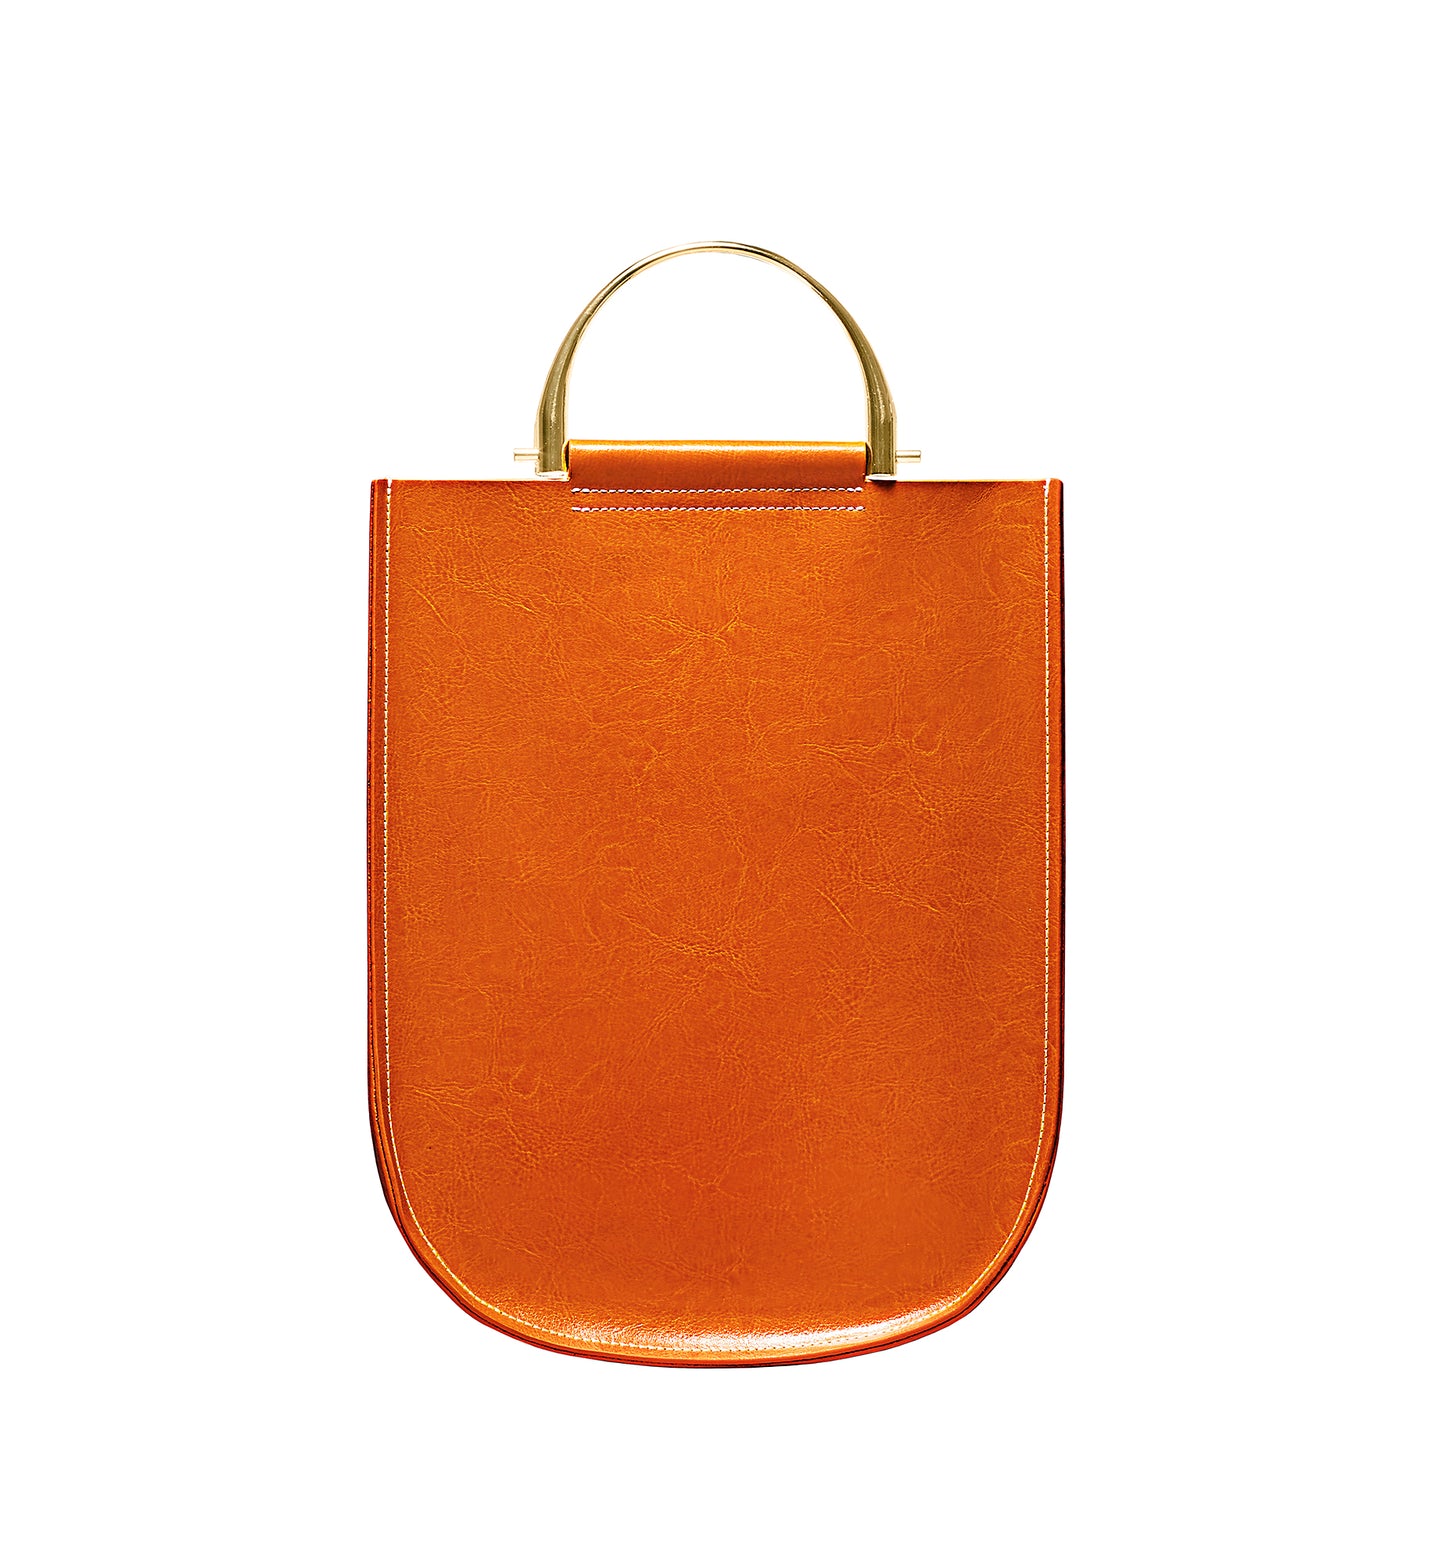 Soft Leather Tote in cognac brown- Gold Handle